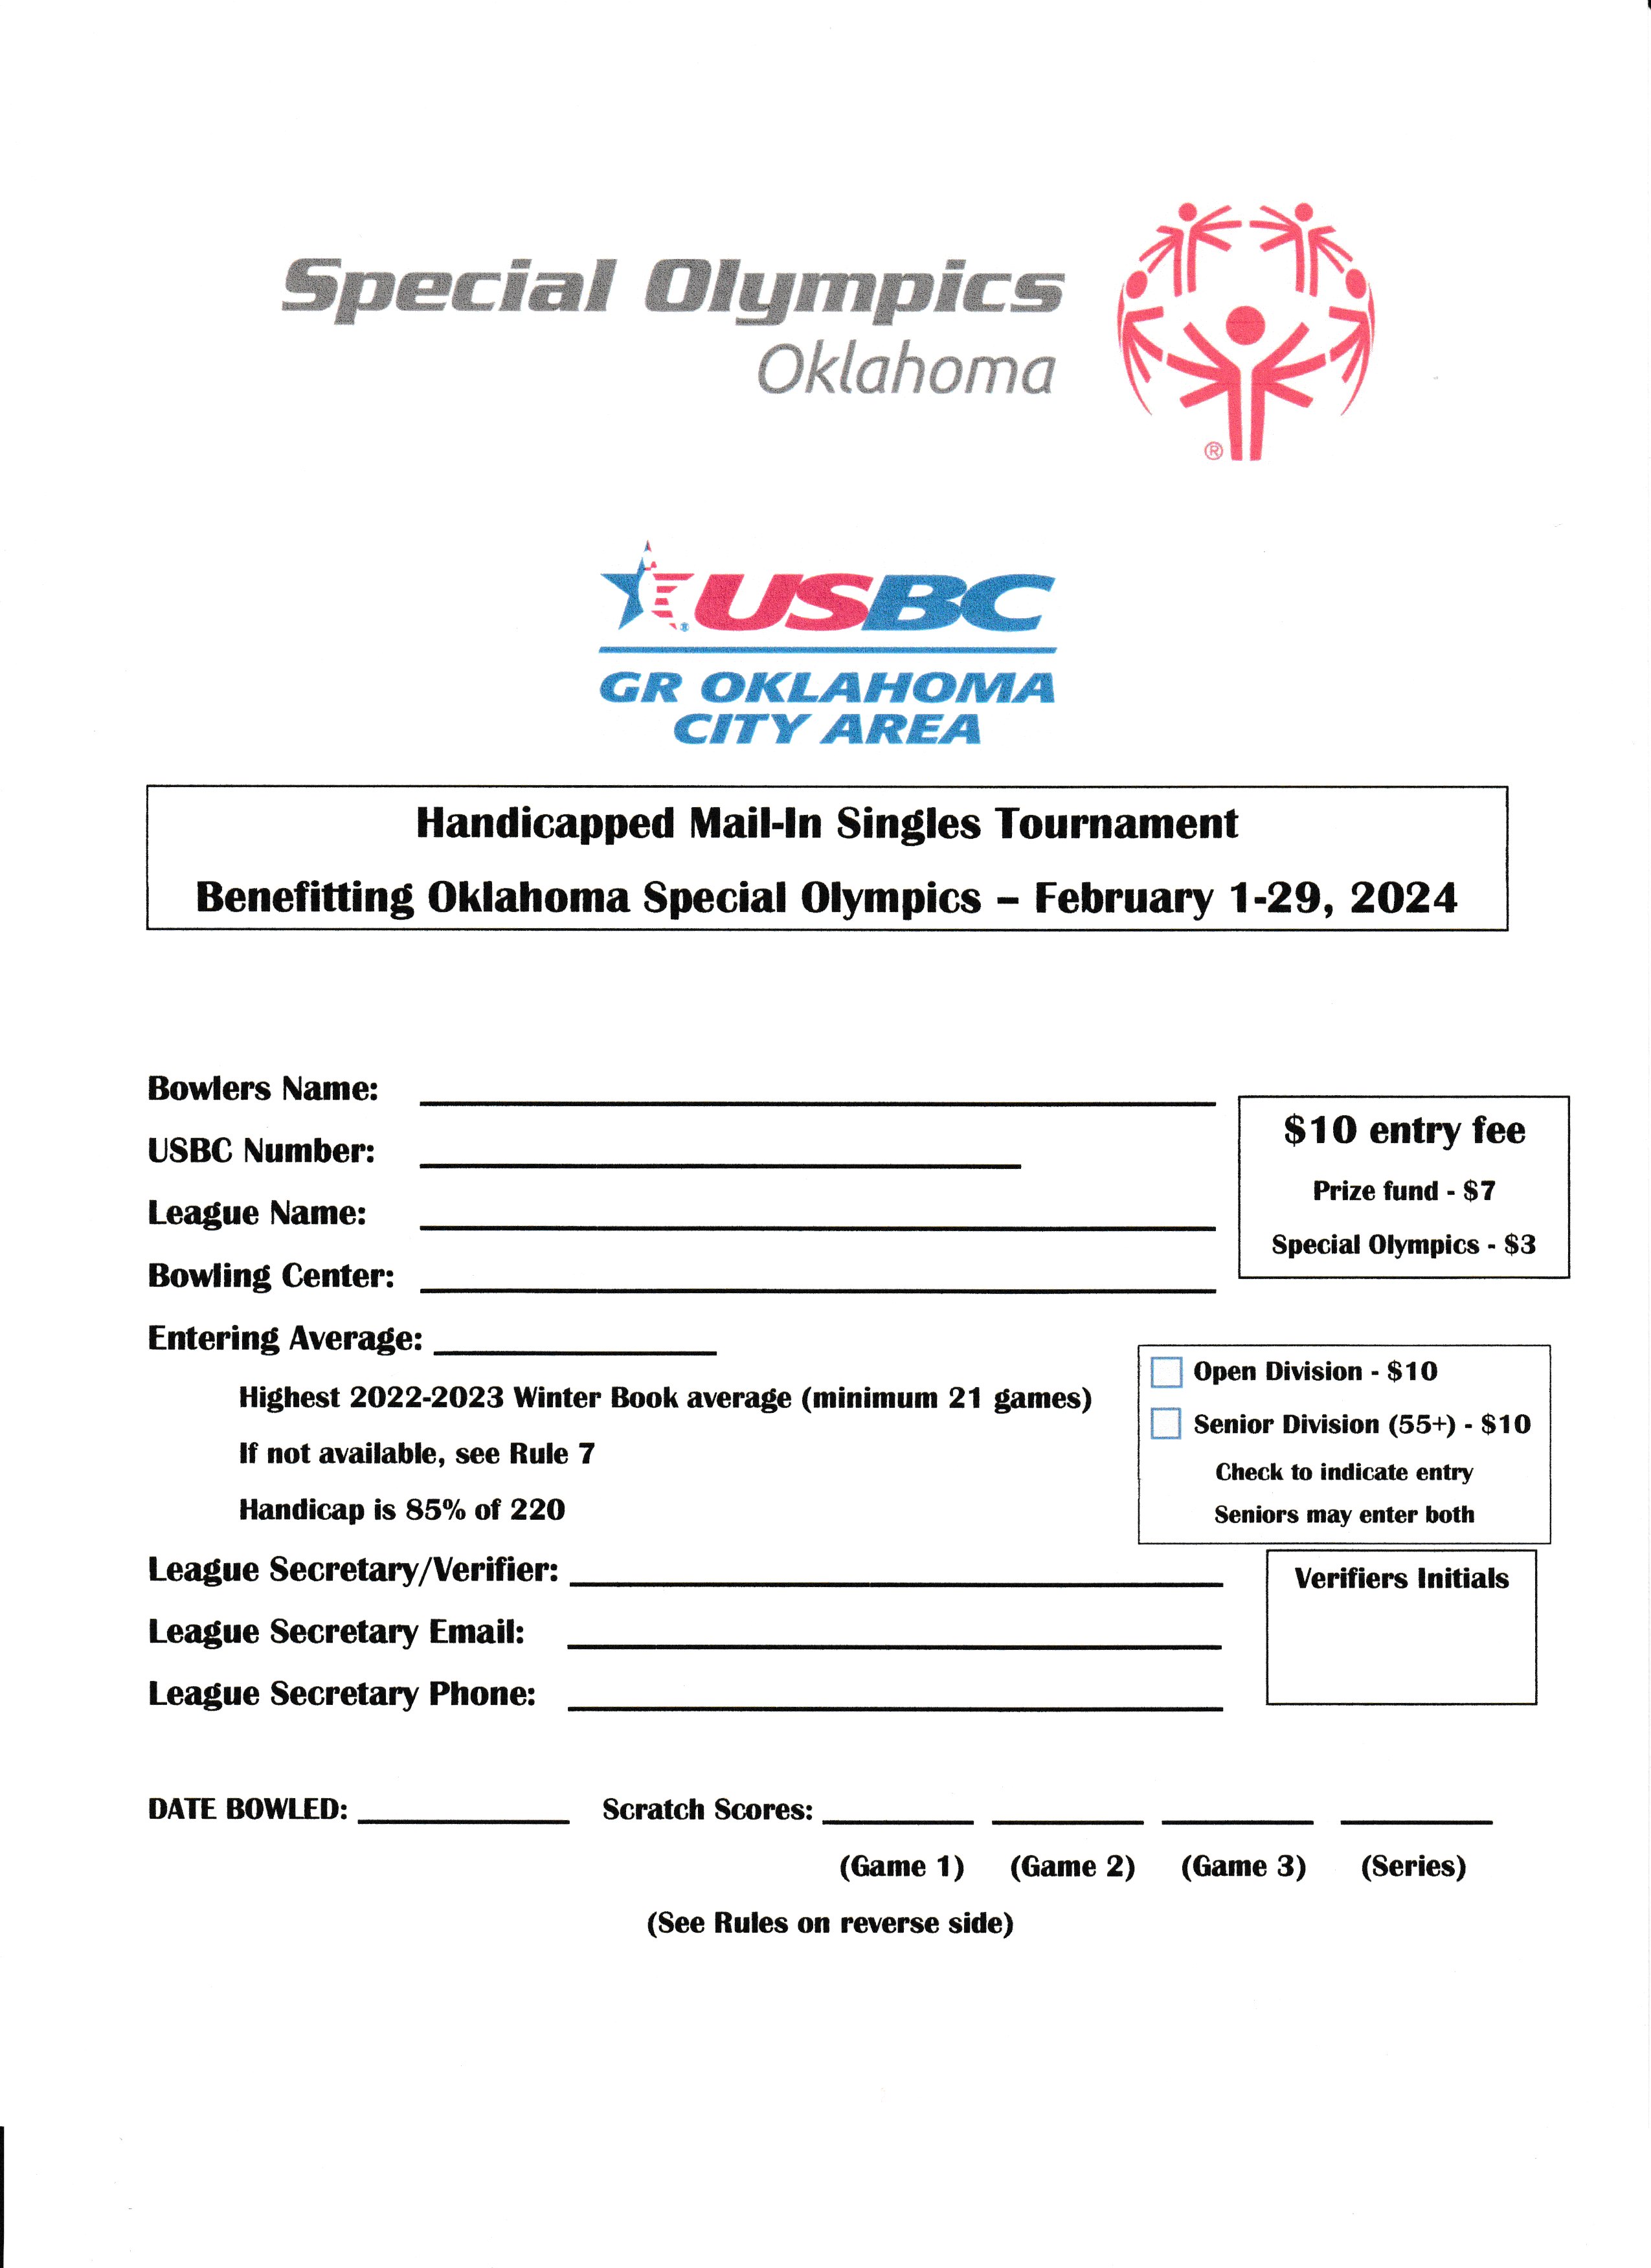 Official Web Site of the Greater Oklahoma City Area USBC